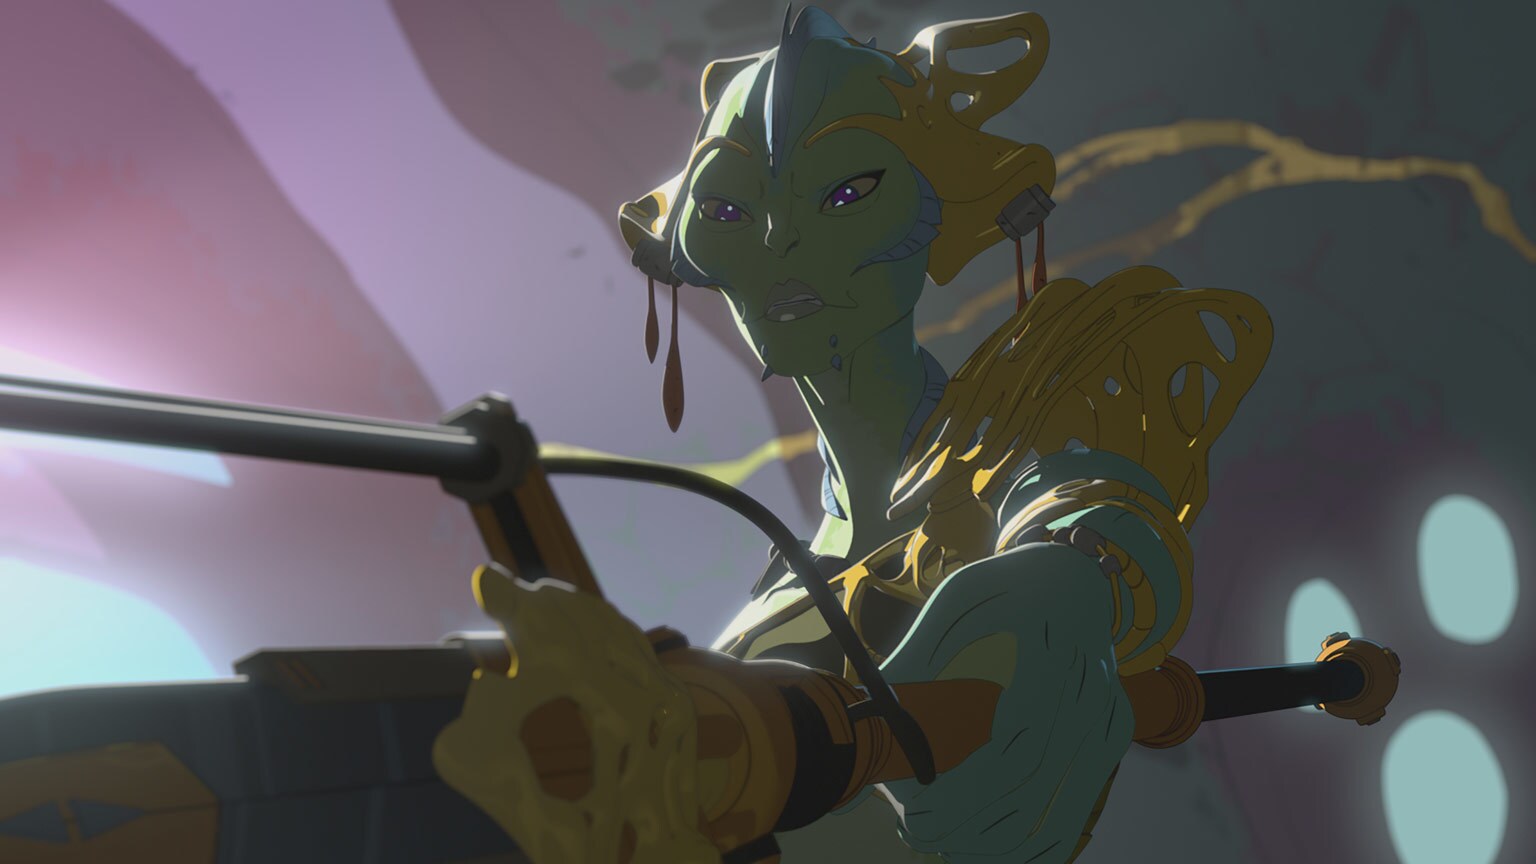 Bucket's List Extra: 7 Fun Facts from "The New World" - Star Wars Resistance